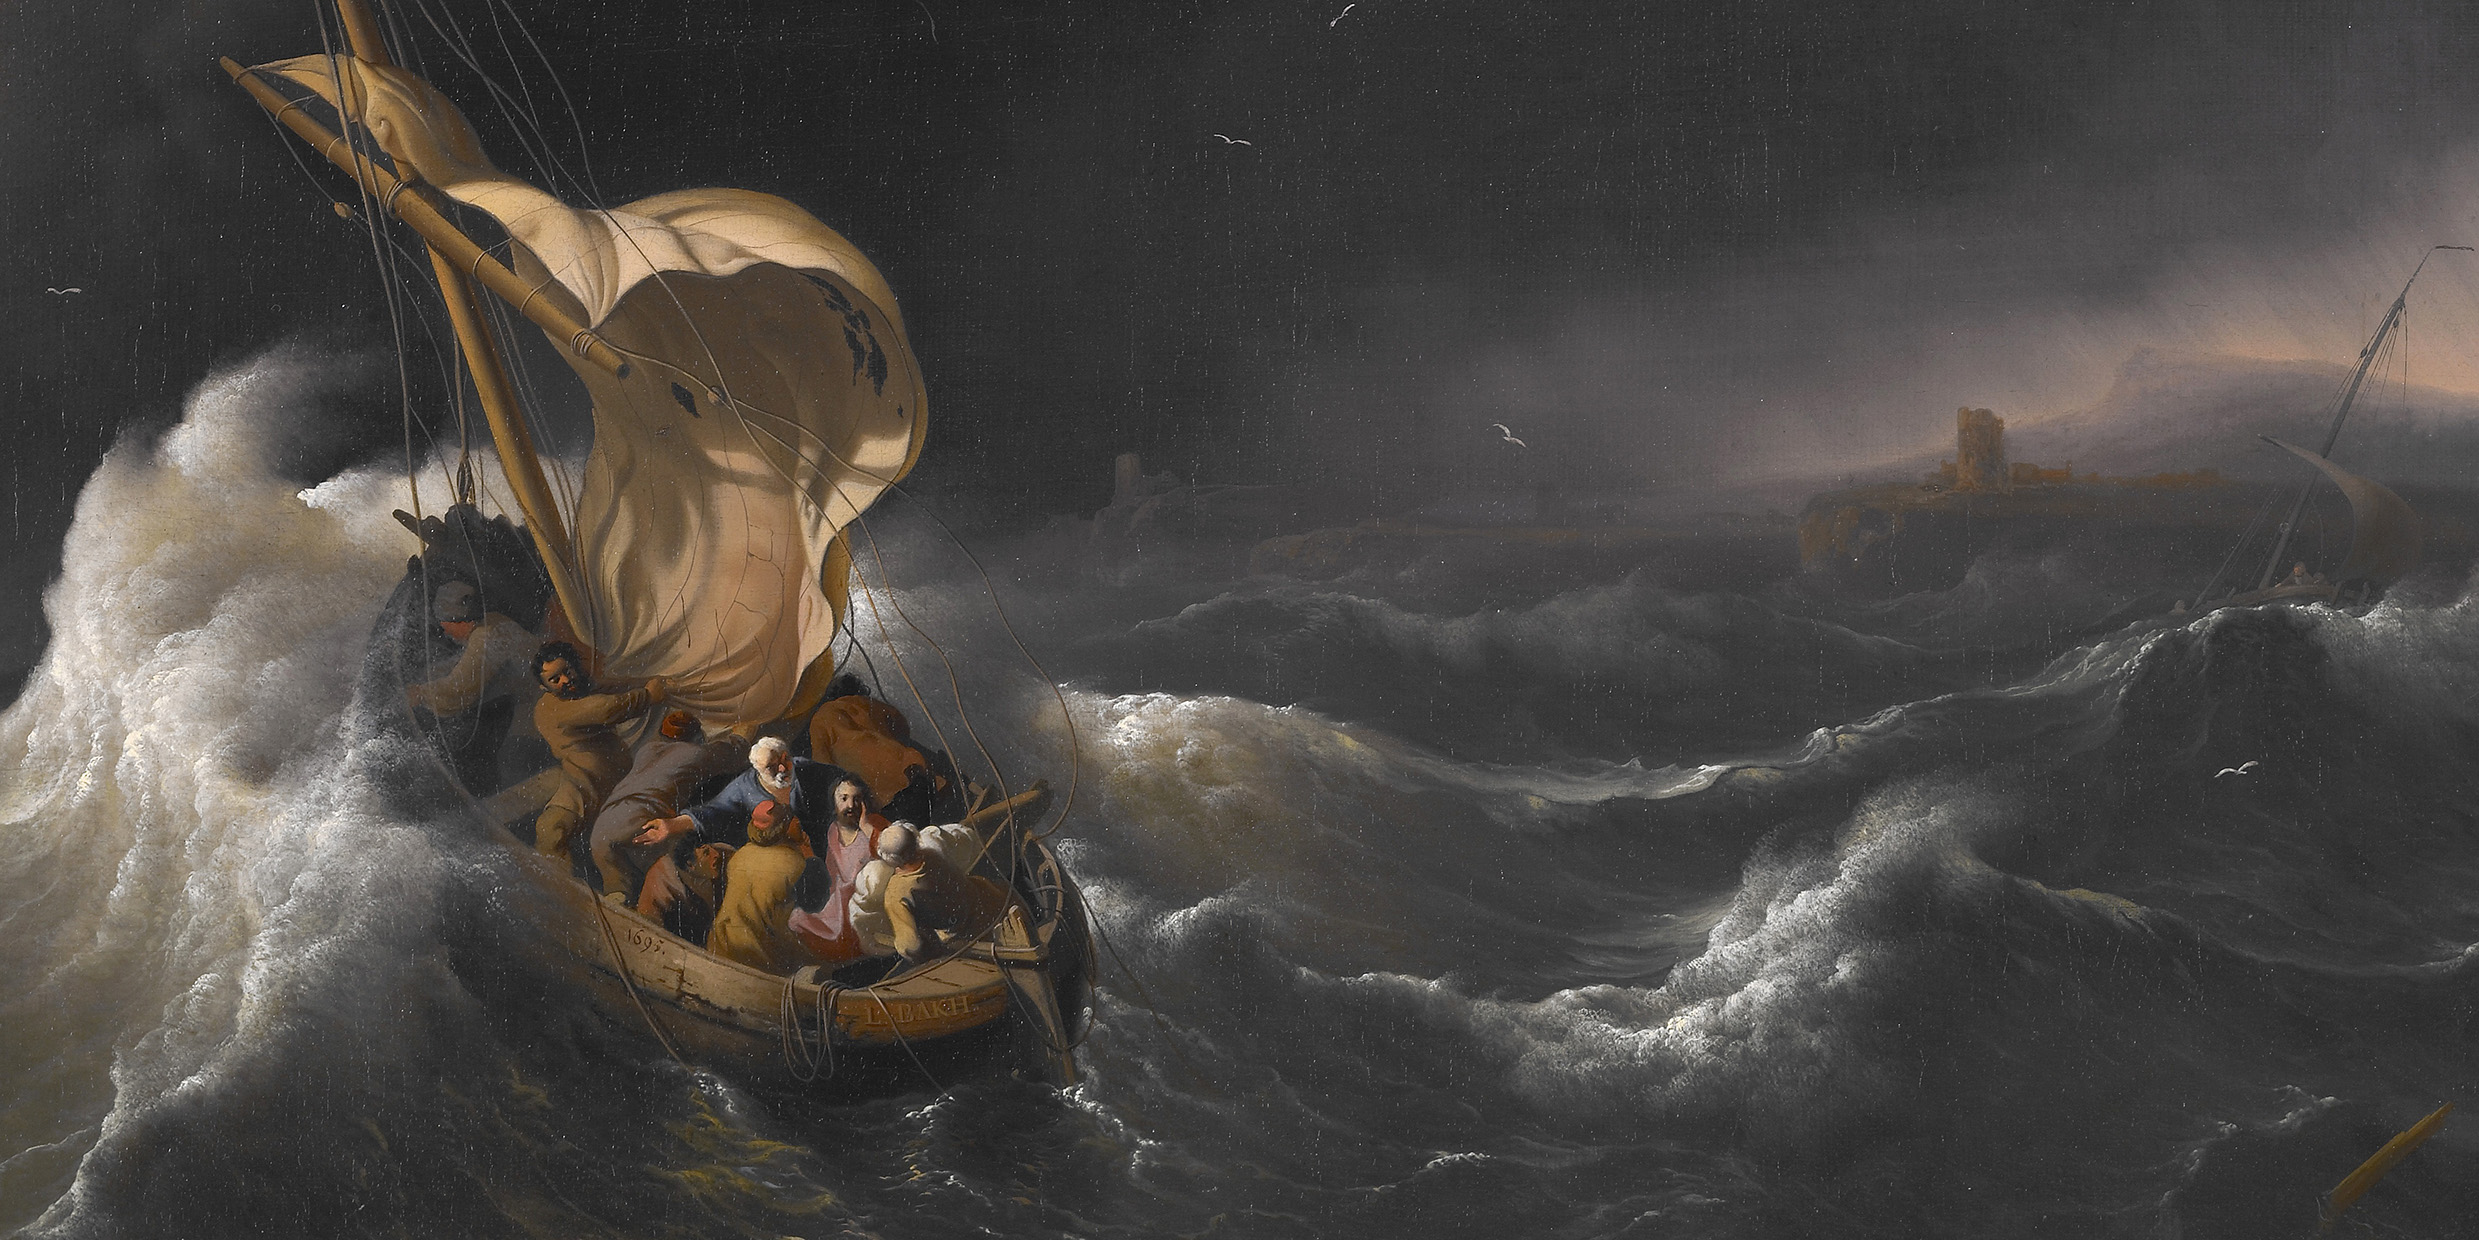 Painting of Christ and others in a boat on a stormy sea